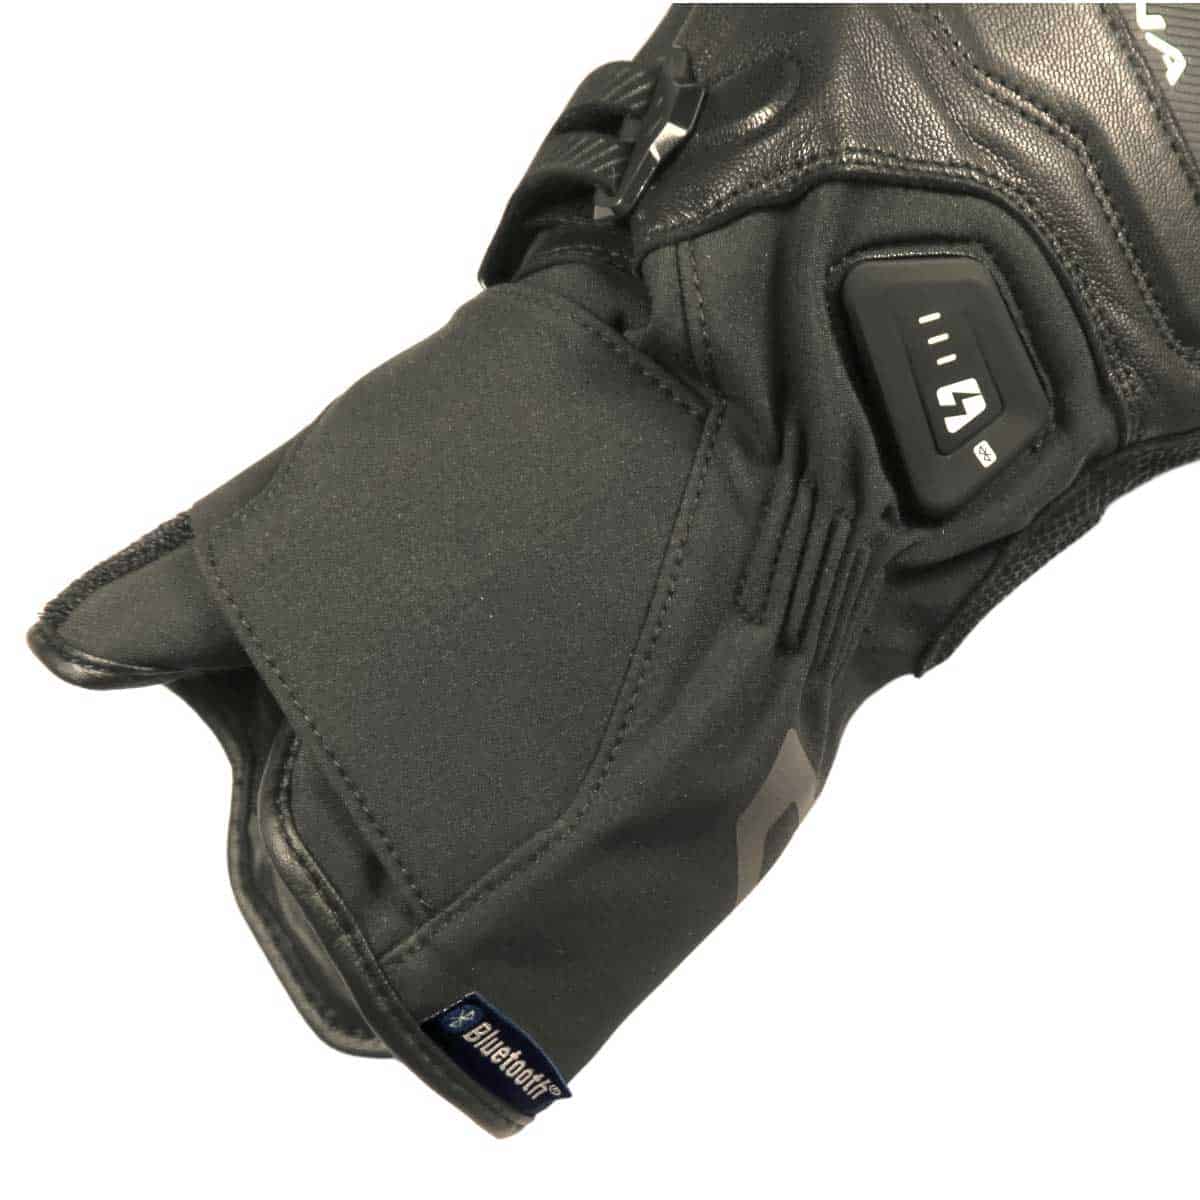 Macna Azra RTX Heated Gloves Kit: A pair of Azra gloves bundled with a 7.4V / 2.2A batteries & charger packMacna Azra RTX Heated Gloves Kit: A pair of Azra gloves bundled with a 7.4V / 2.2A batteries & charger pack  - cuff